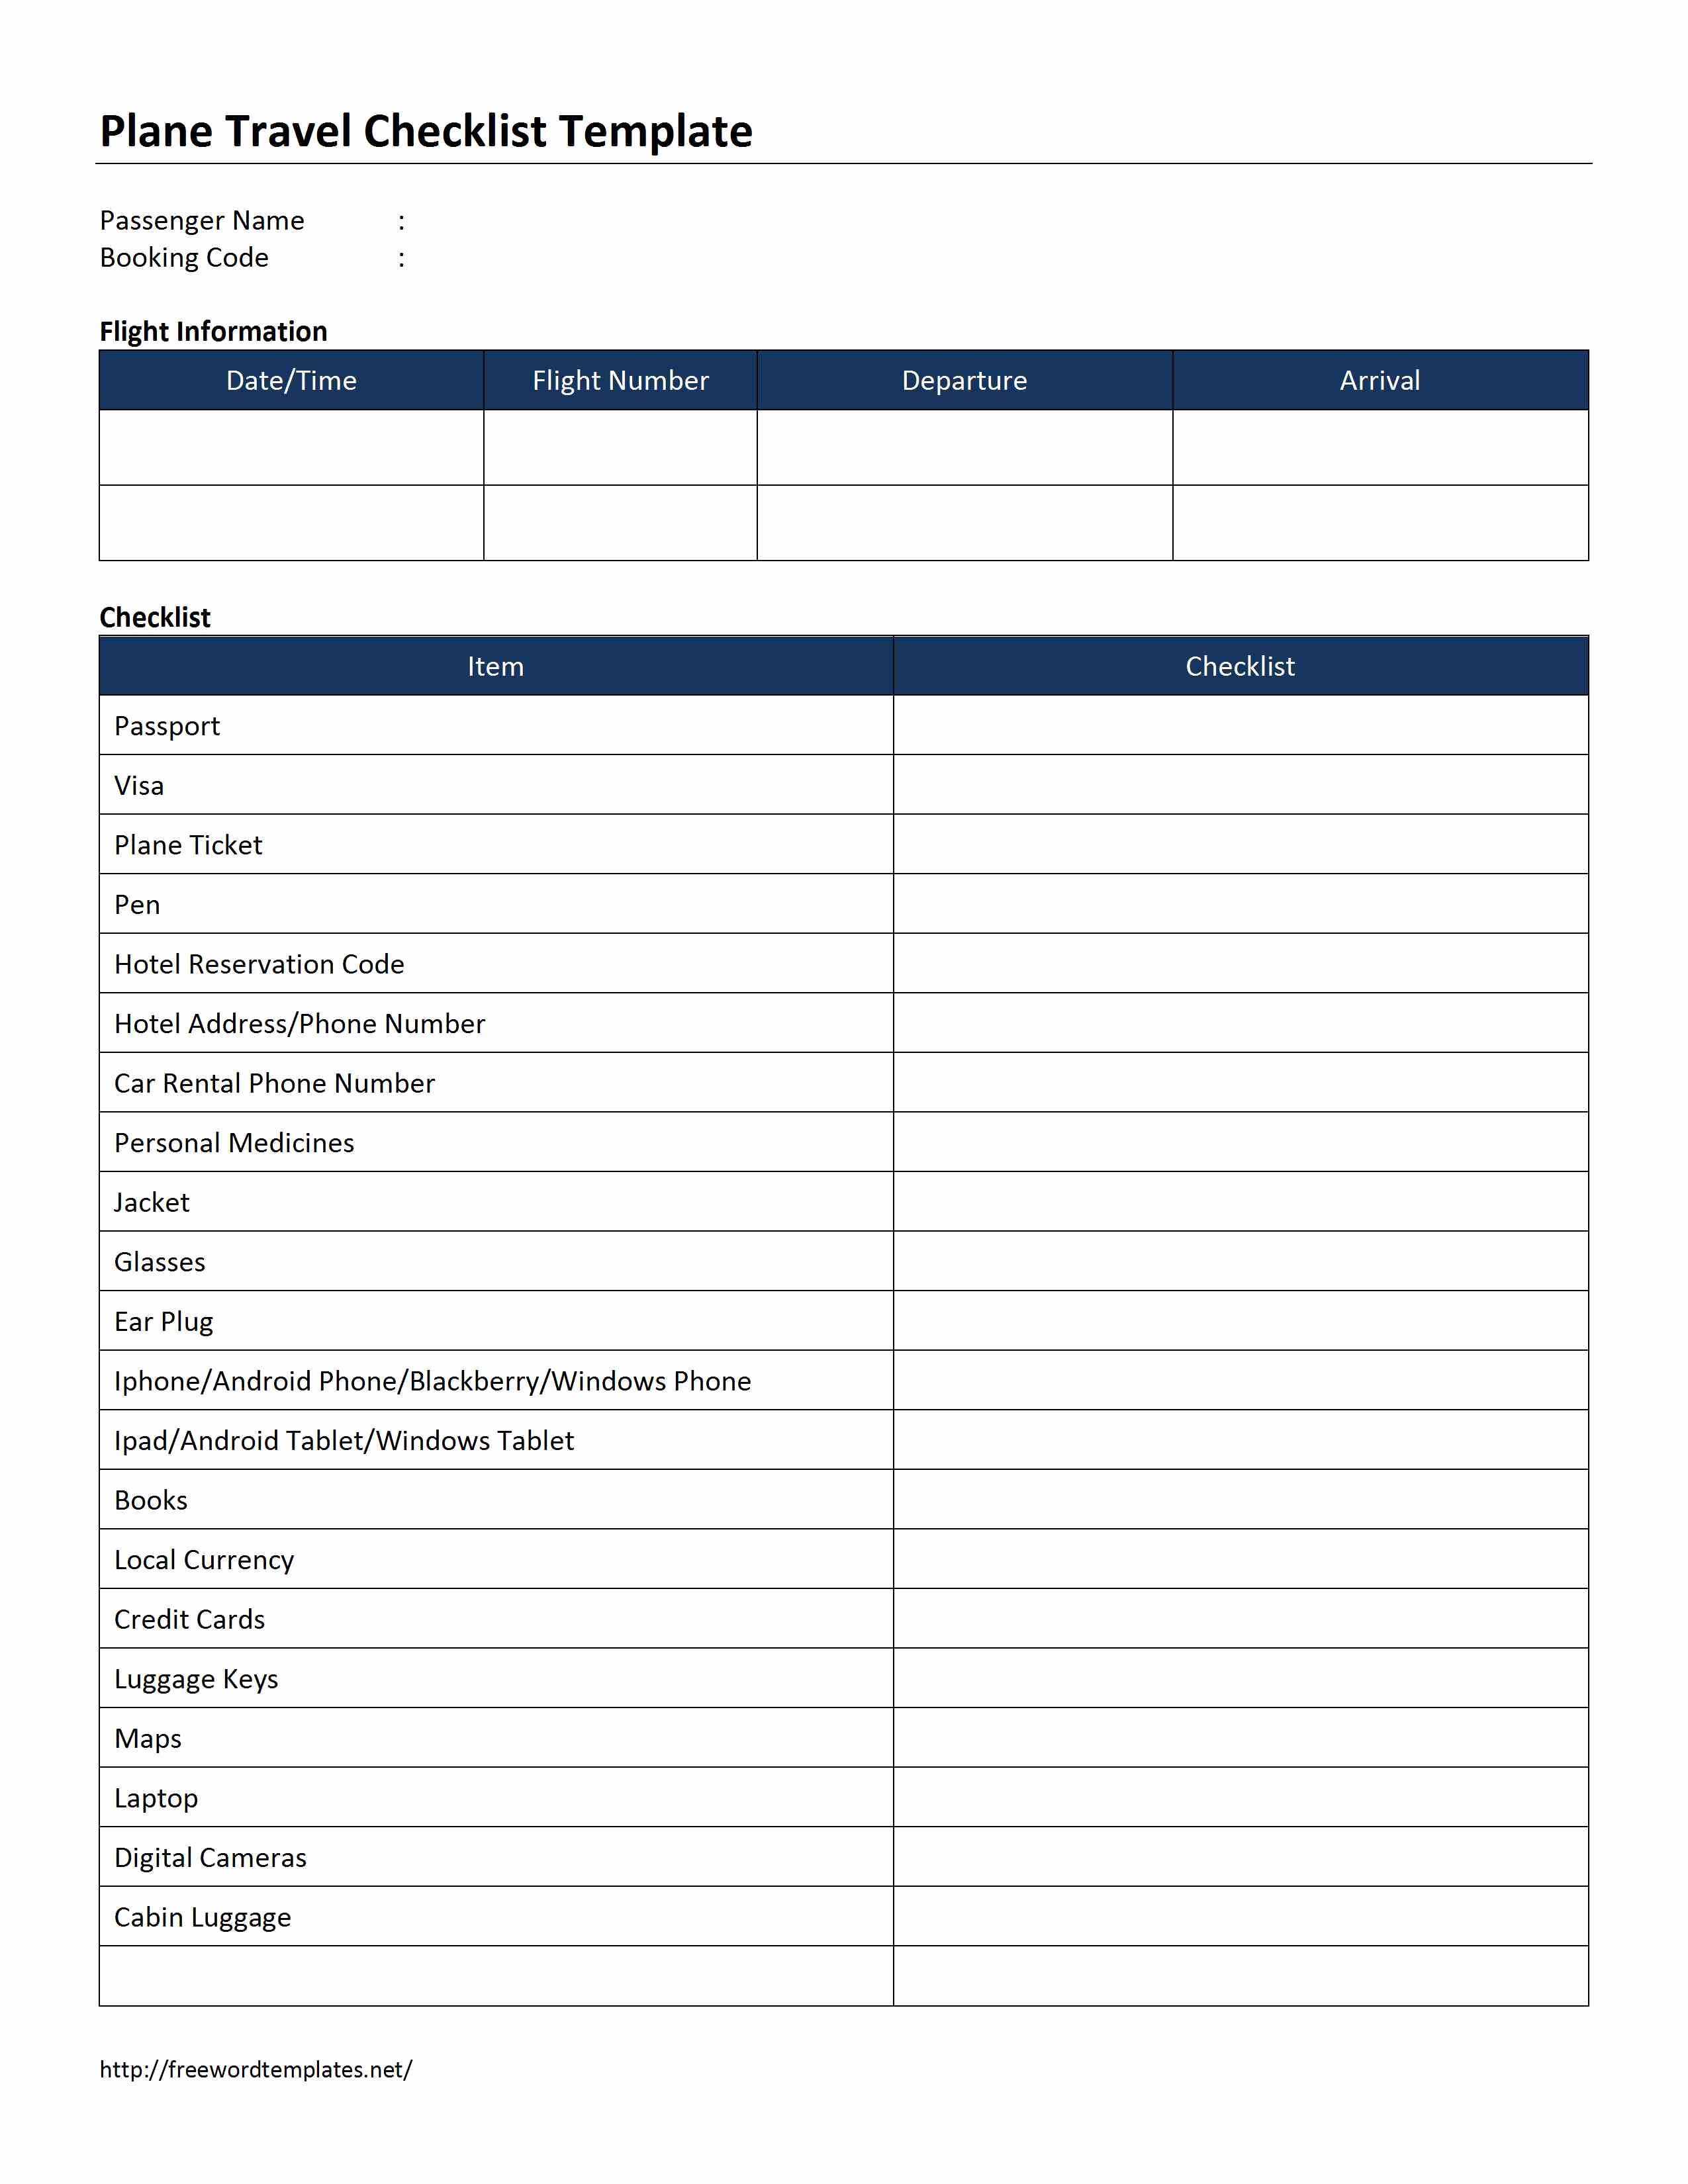 Ms Word Check Template New Plane Travel Checklist Template